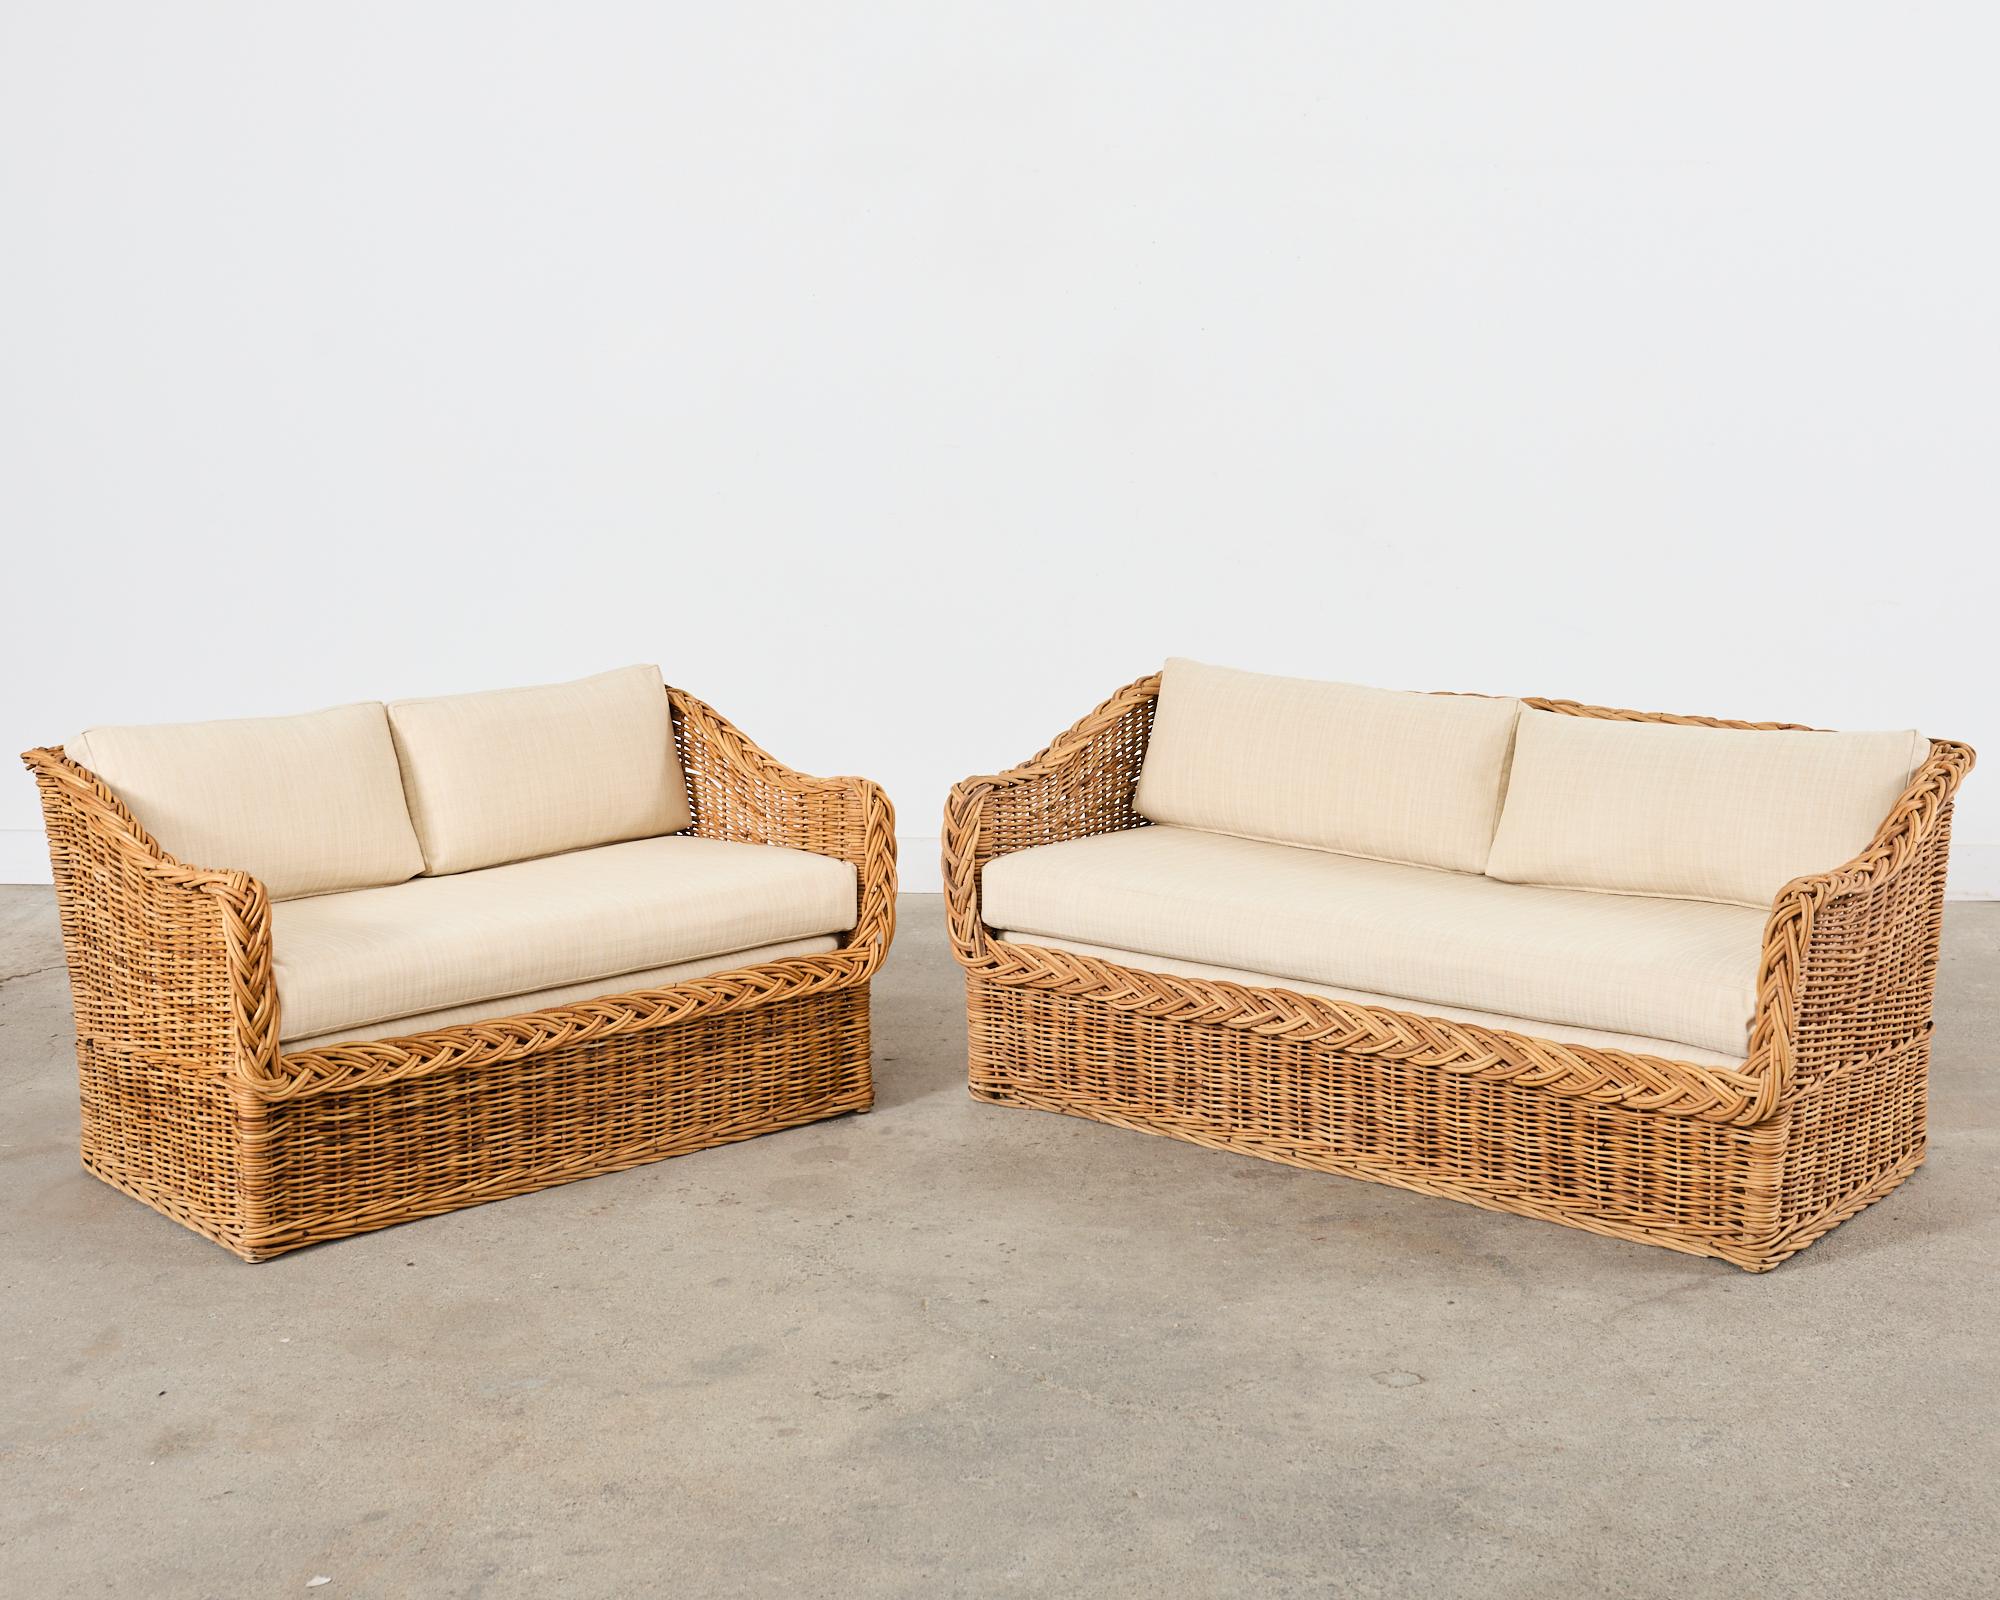 Italian Michael Taylor Style Wicker Rattan Sofa and Settee by Wicker Works For Sale